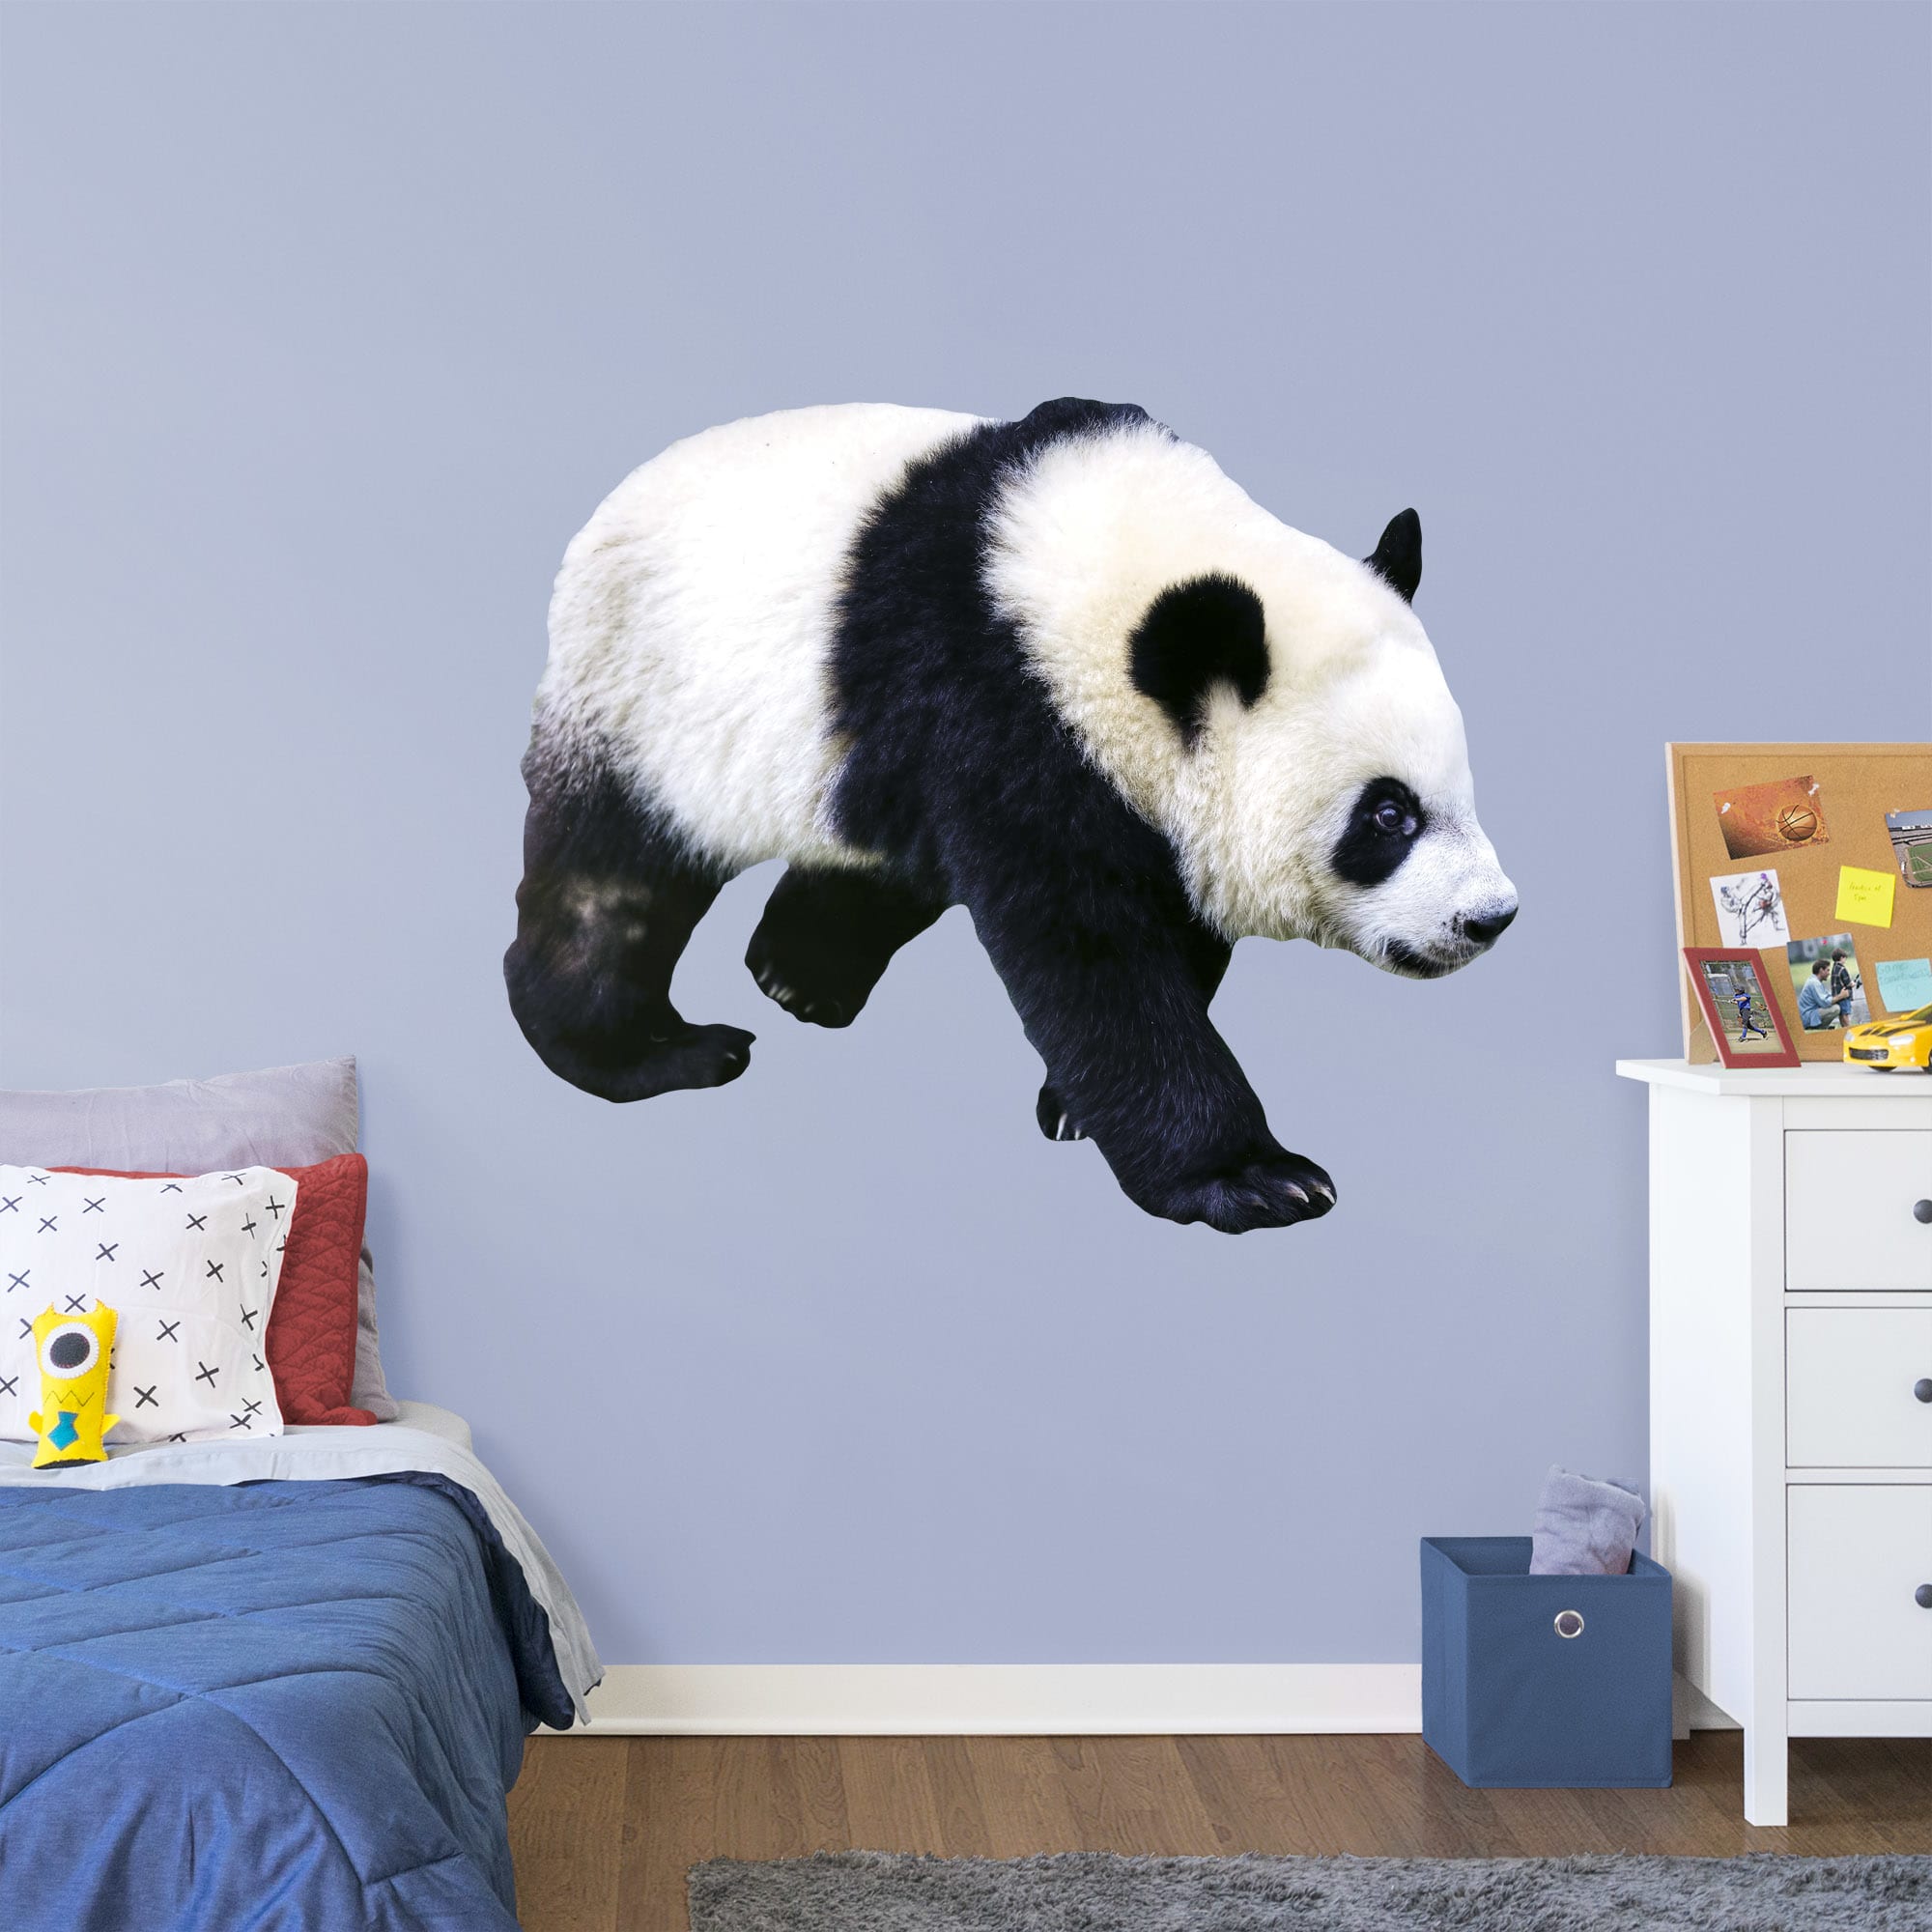 Panda - Removable Vinyl Decal Huge Animal + 4 Decals (62"W x 51"H) by Fathead